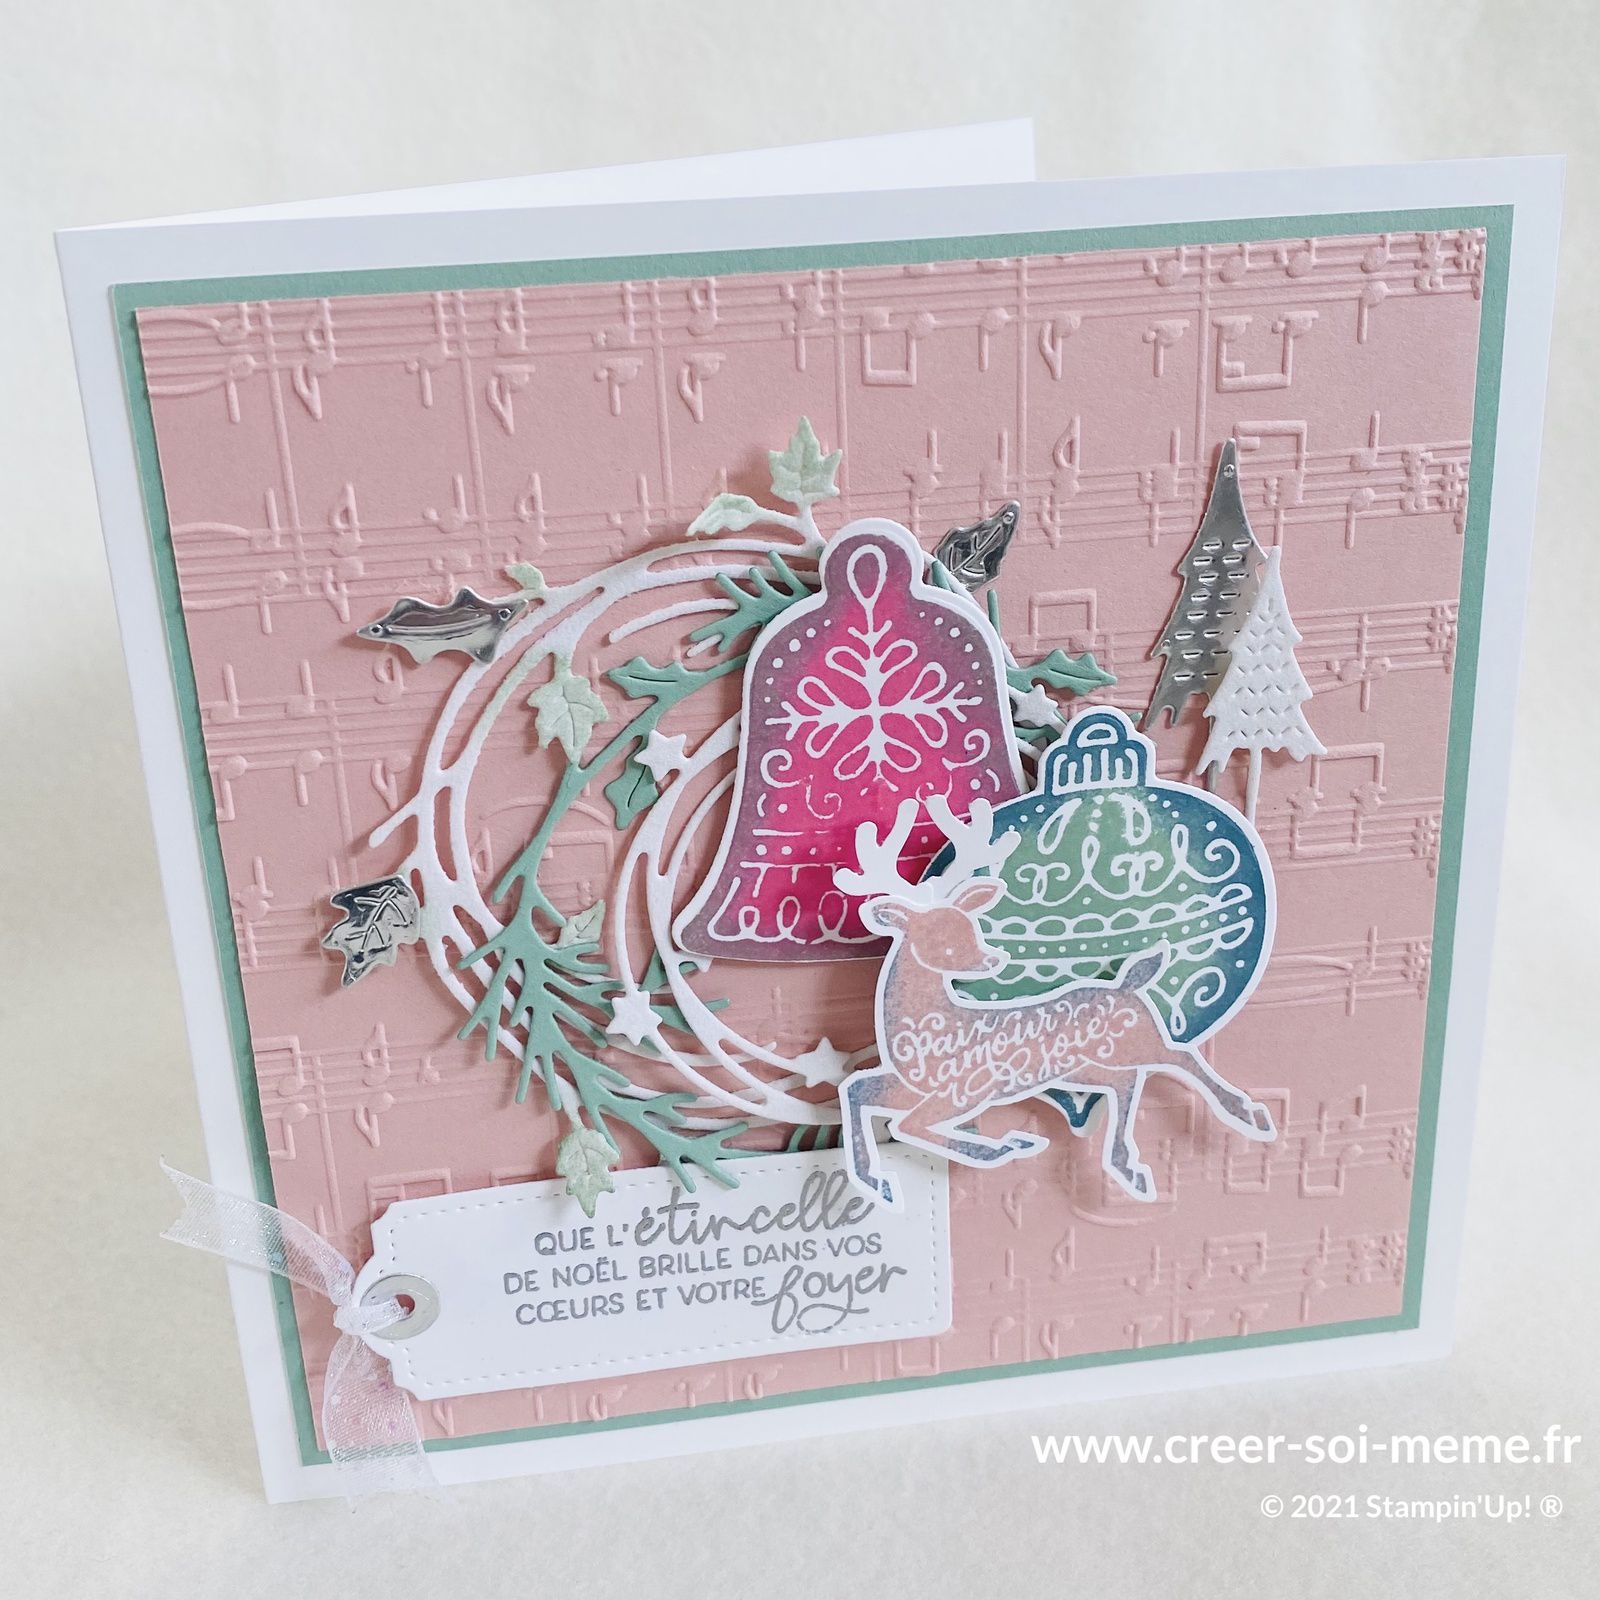 noel rose stampin up 2021 couleur pastel cerf chevreuil cloche boule sapin couronne fournitures